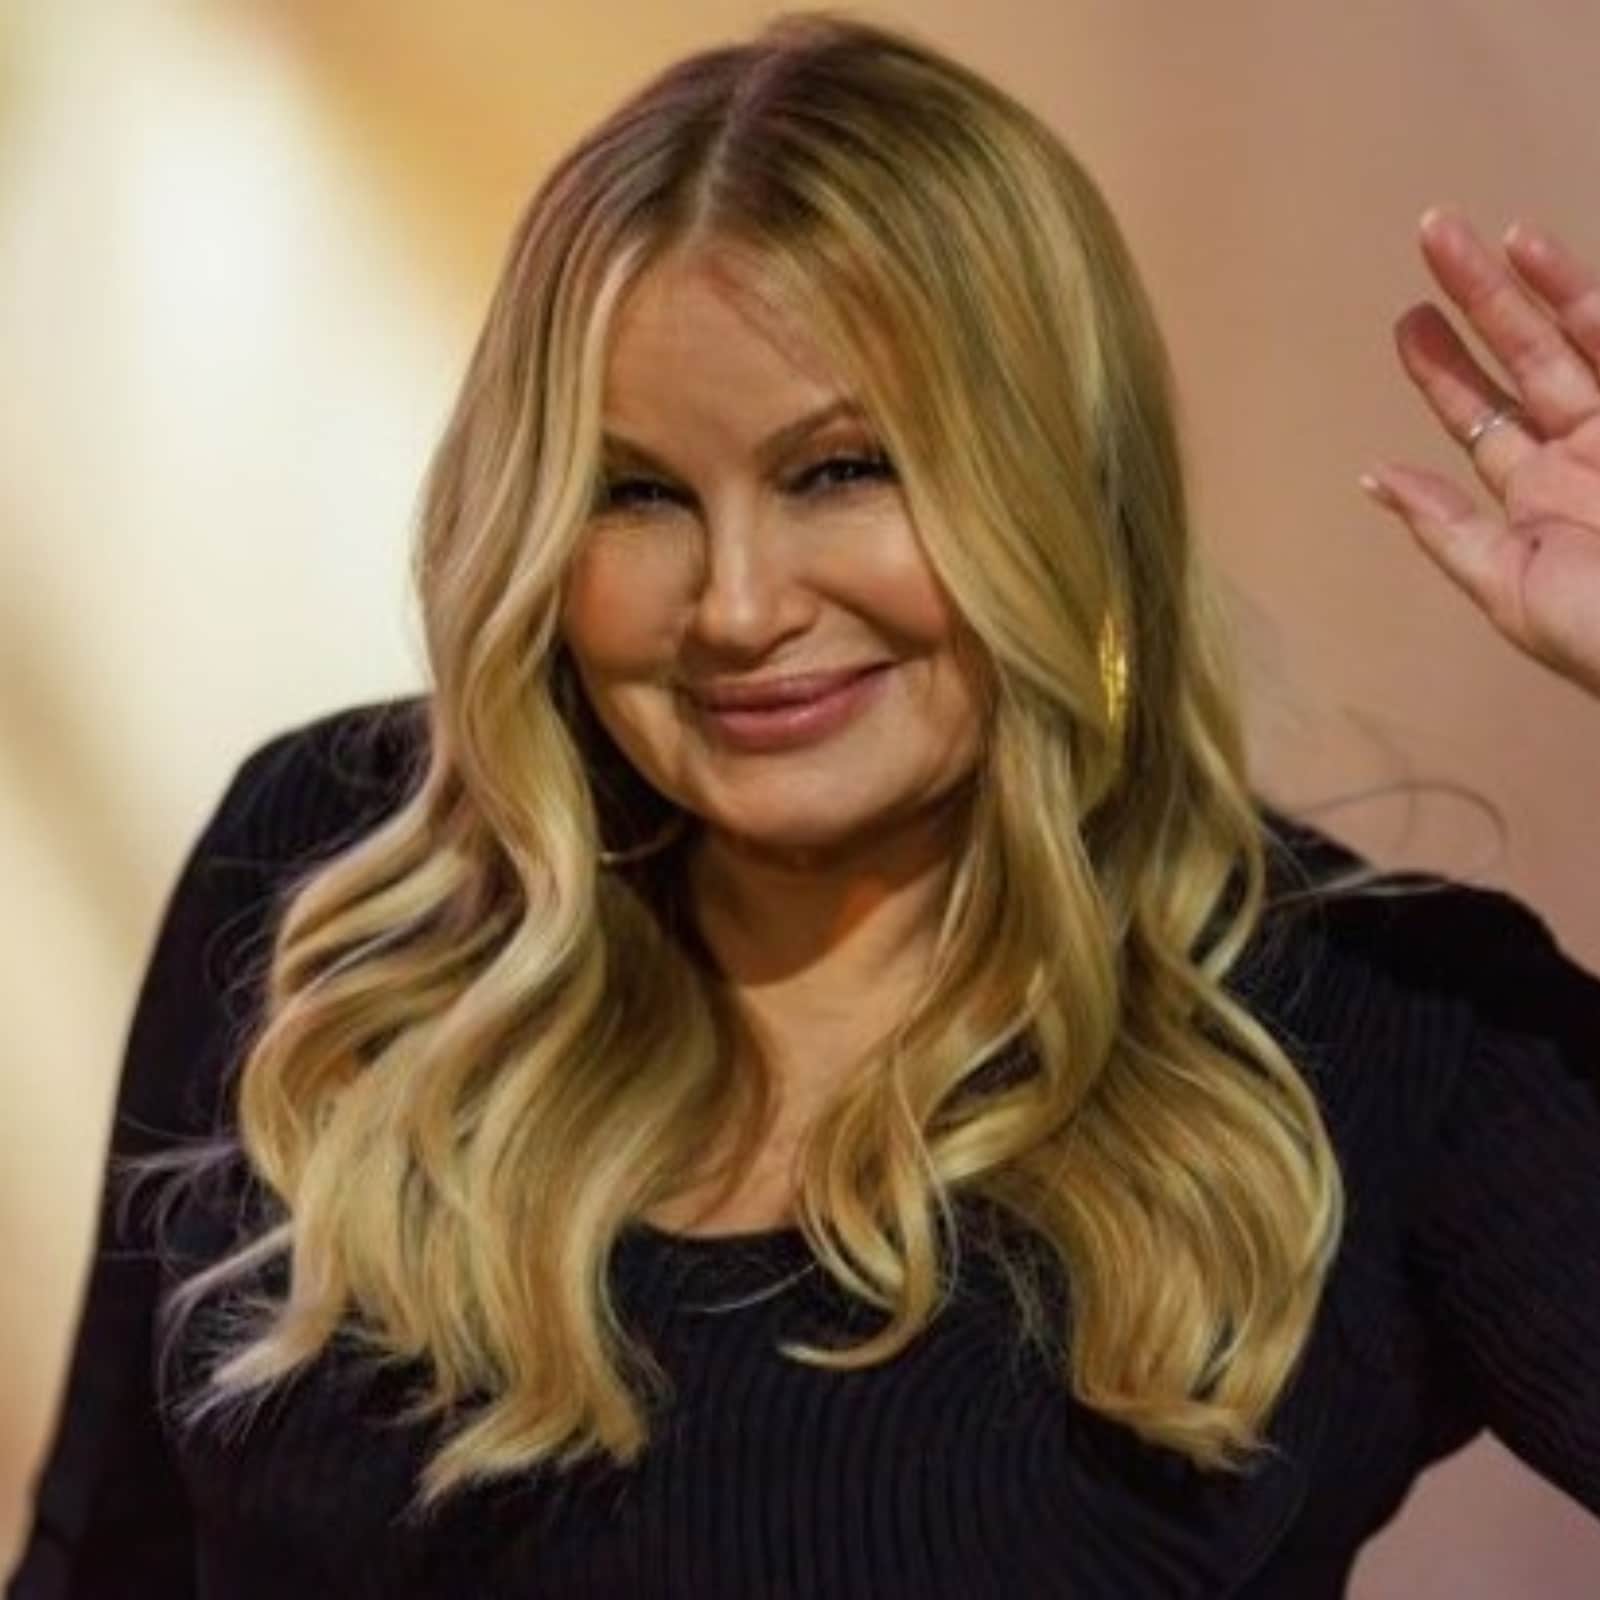 Sleeping Katrina Xxx - Jennifer Coolidge Admits To Sleeping With 200 People After American Pie:  'Got Lots Of Sexual Action' - News18